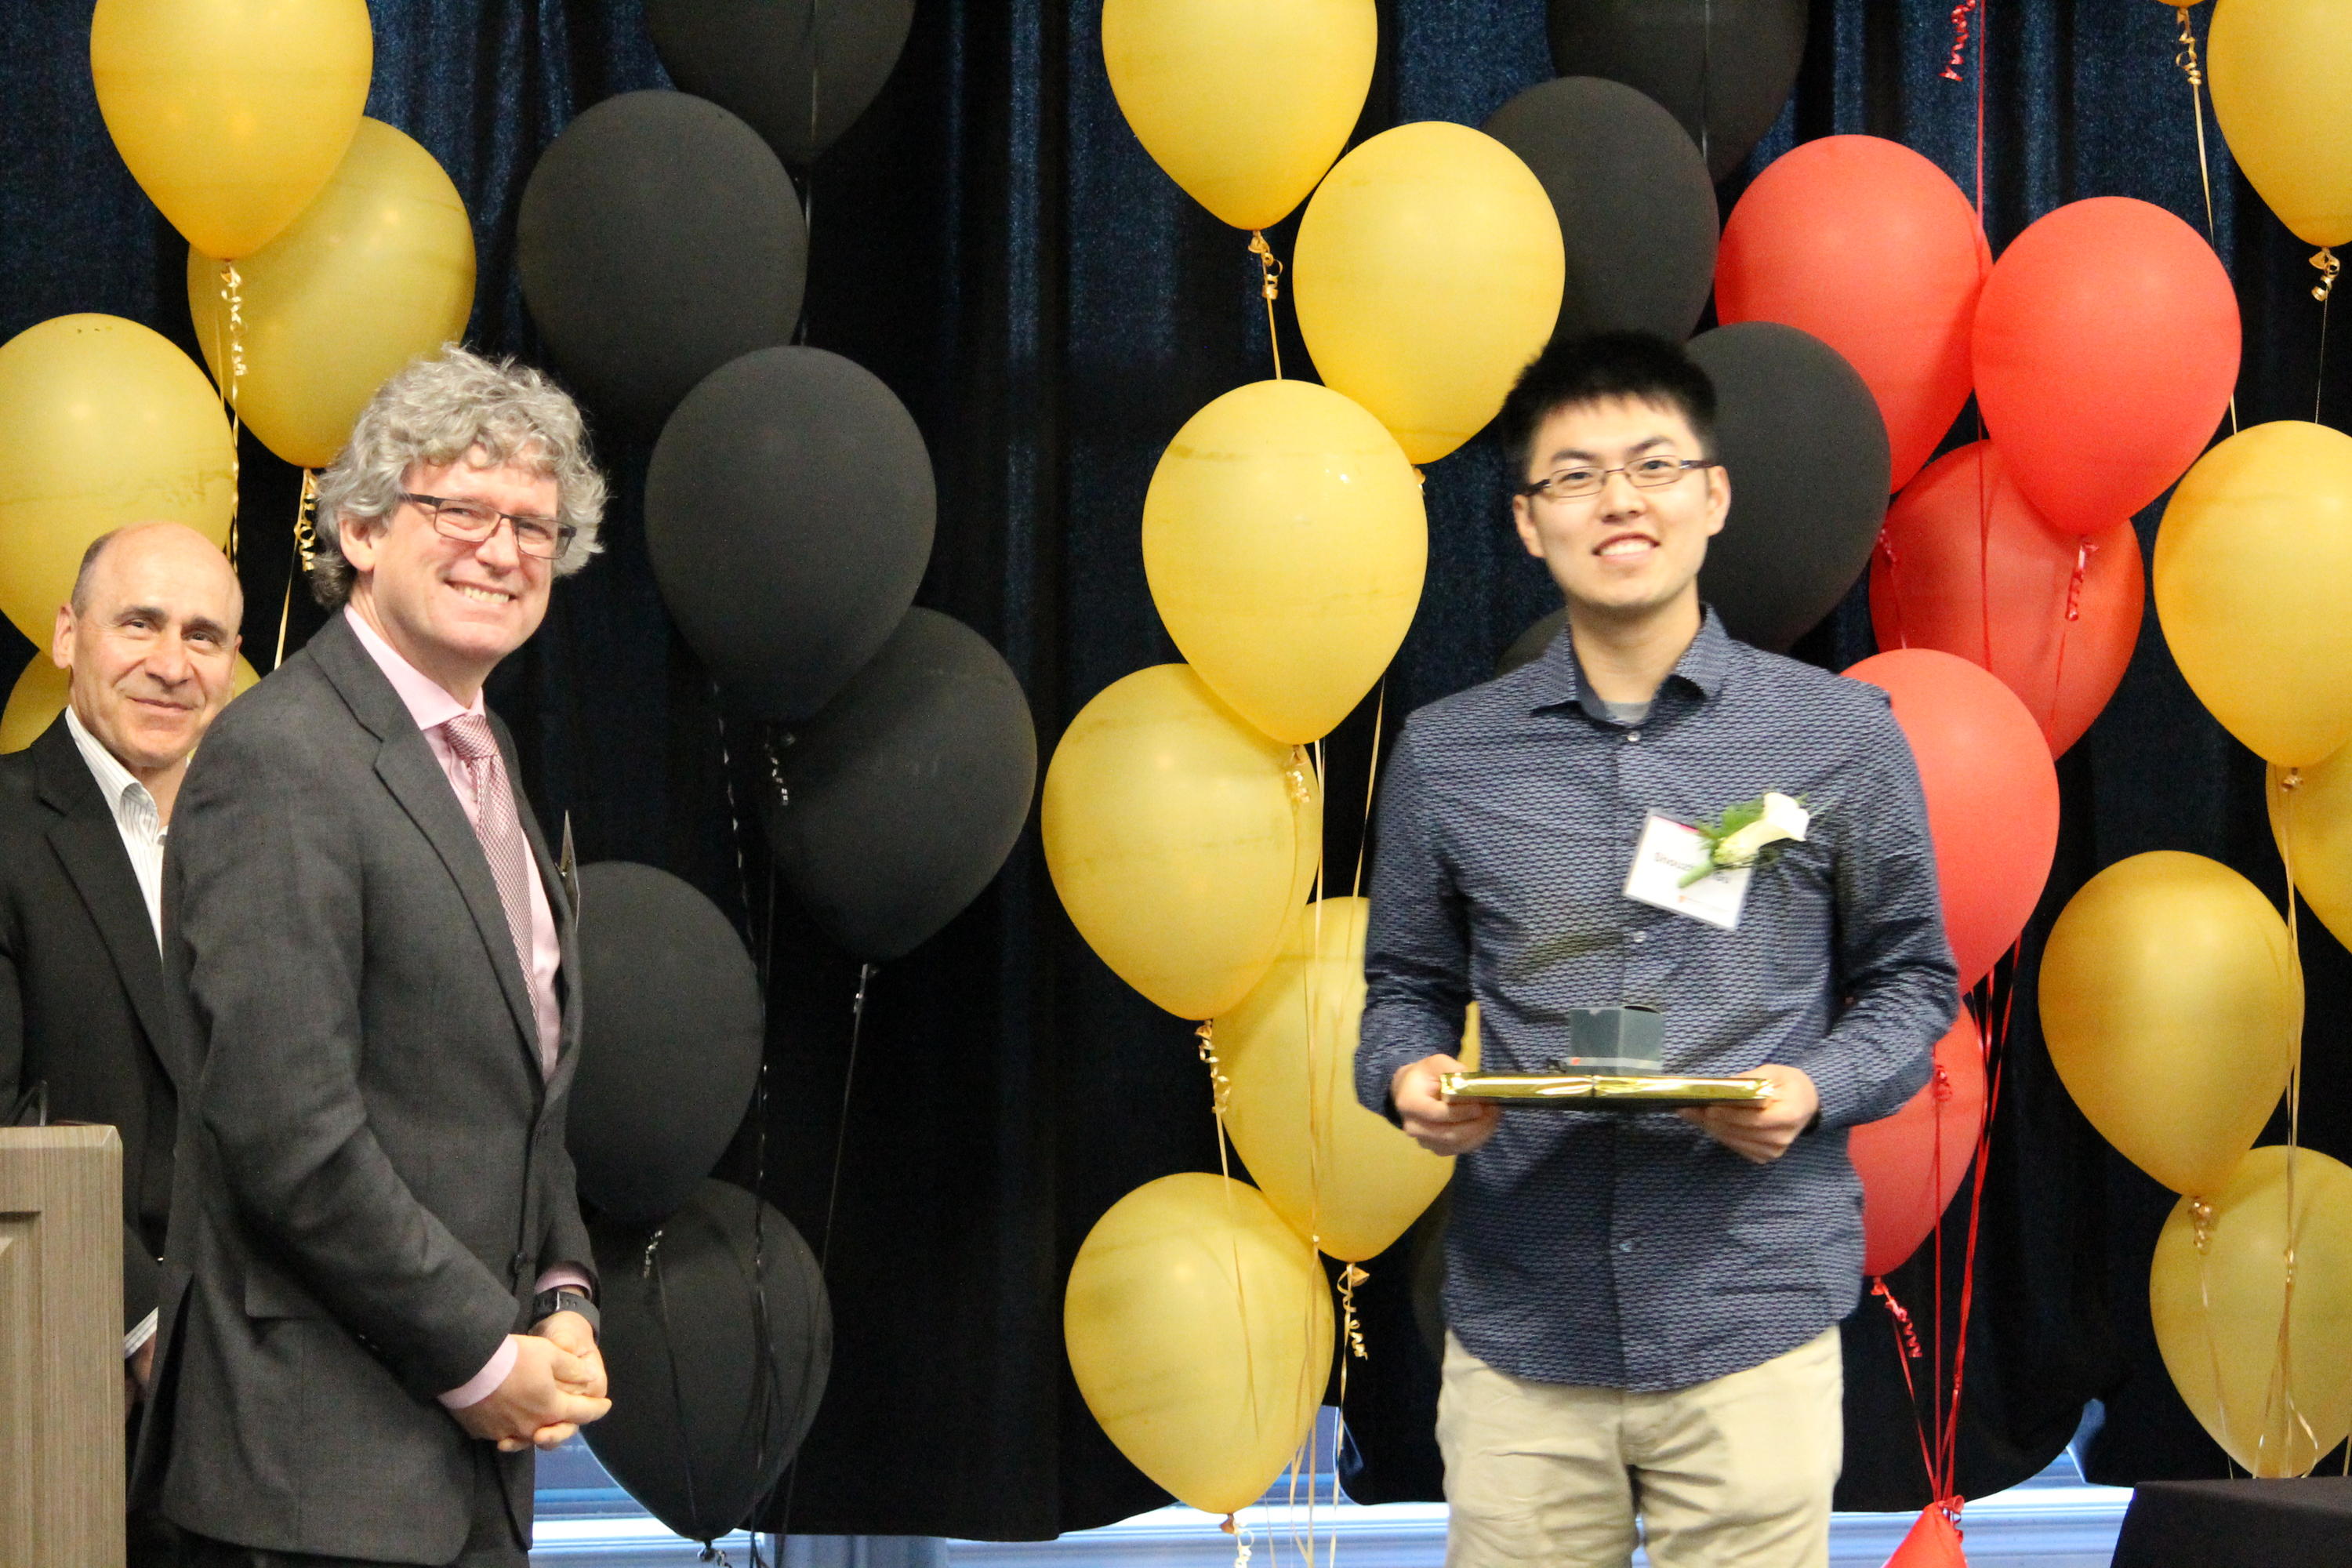 Bailey Gu is honoured by Dean Stephen Watt and Associate Dean Serge D'Alessio at the Faculty of Mathematics Convocation Dinner